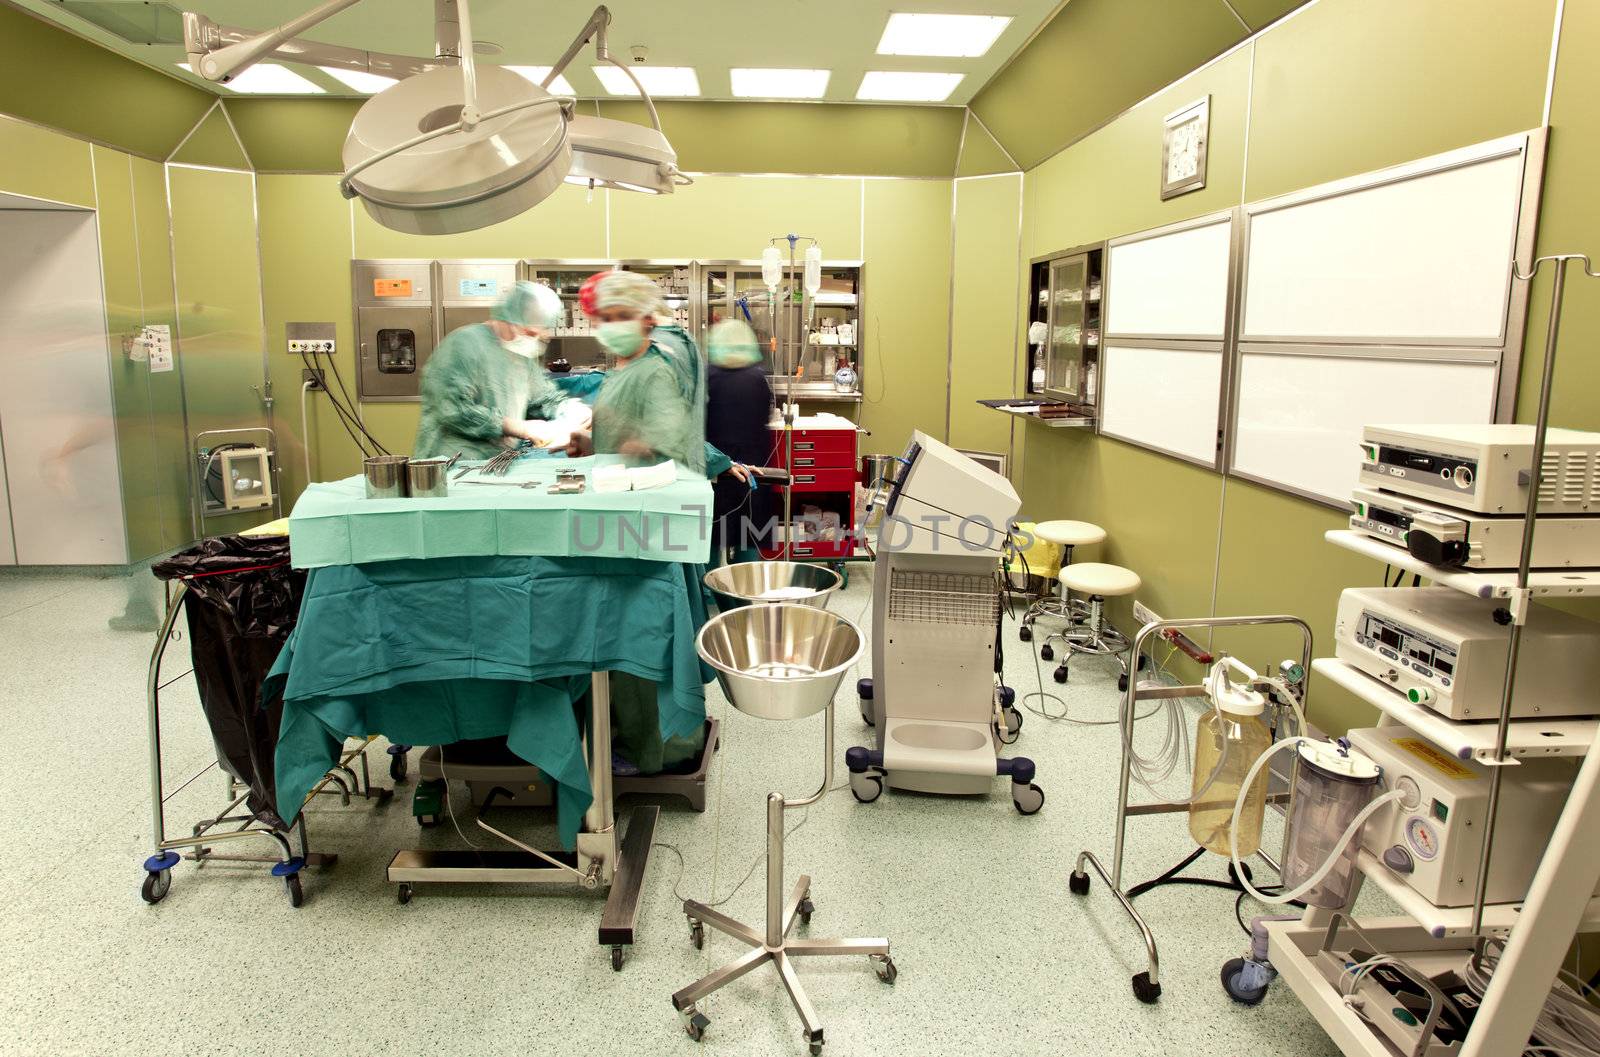 Blurred figures of doctors performing surgery in operative room